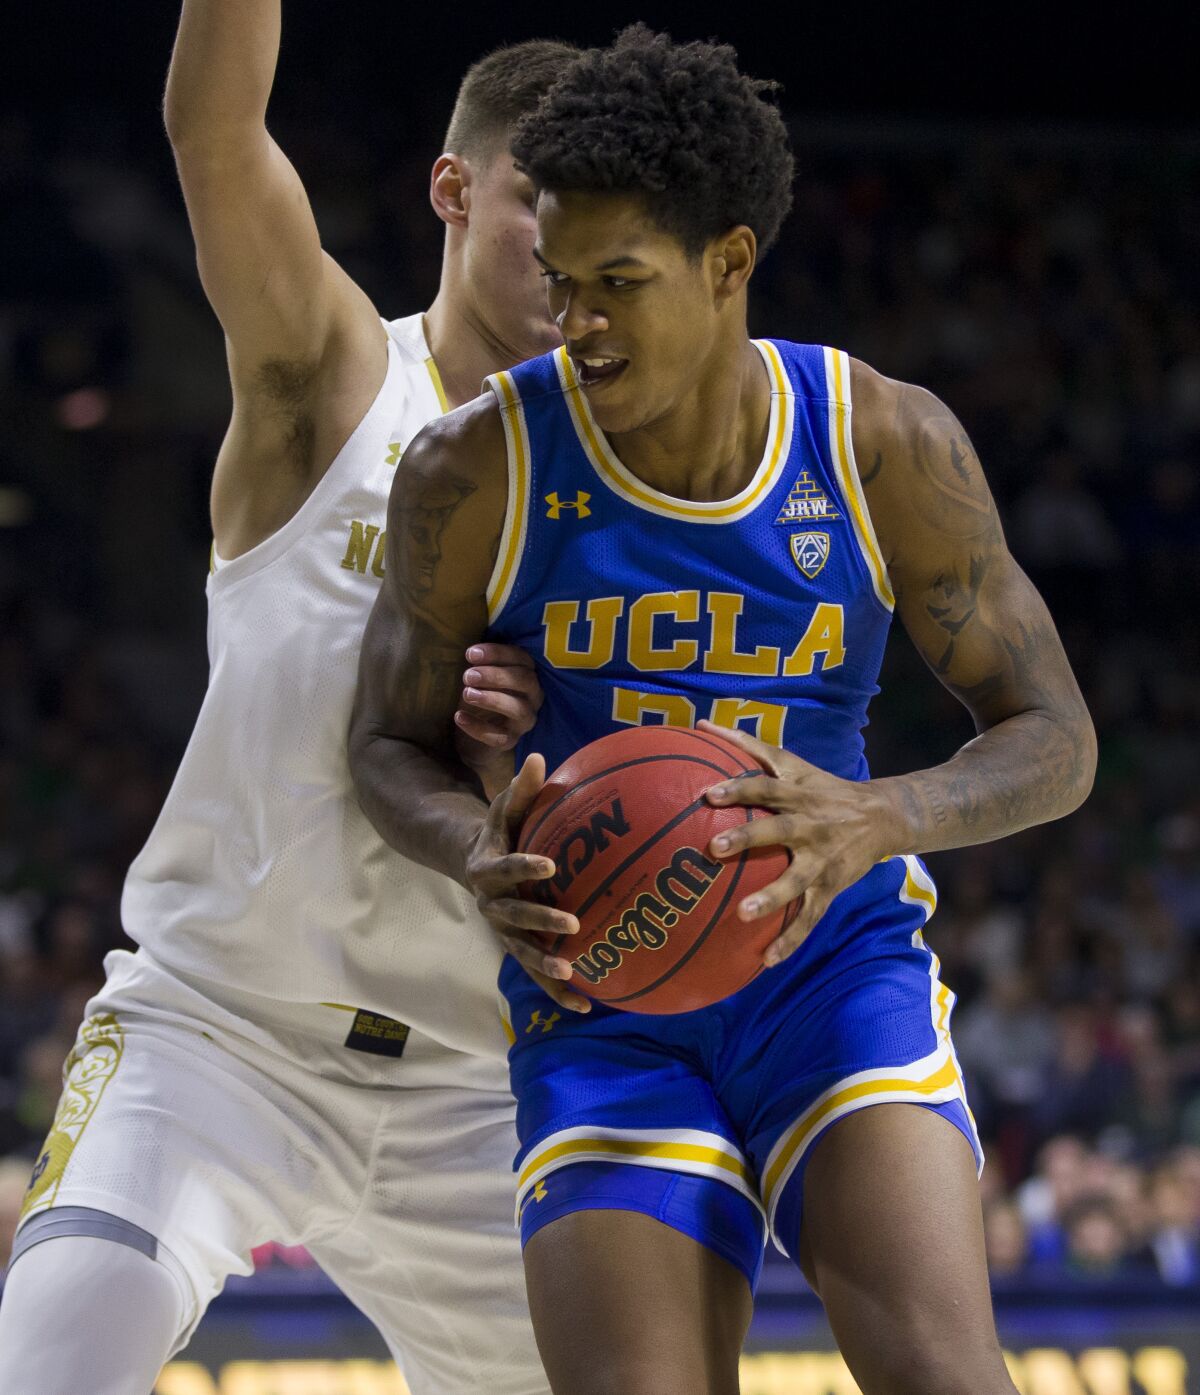 UCLA's Shareef O'Neal is pressured by Notre Dame's Nate Laszewski during a game Dec. 14.